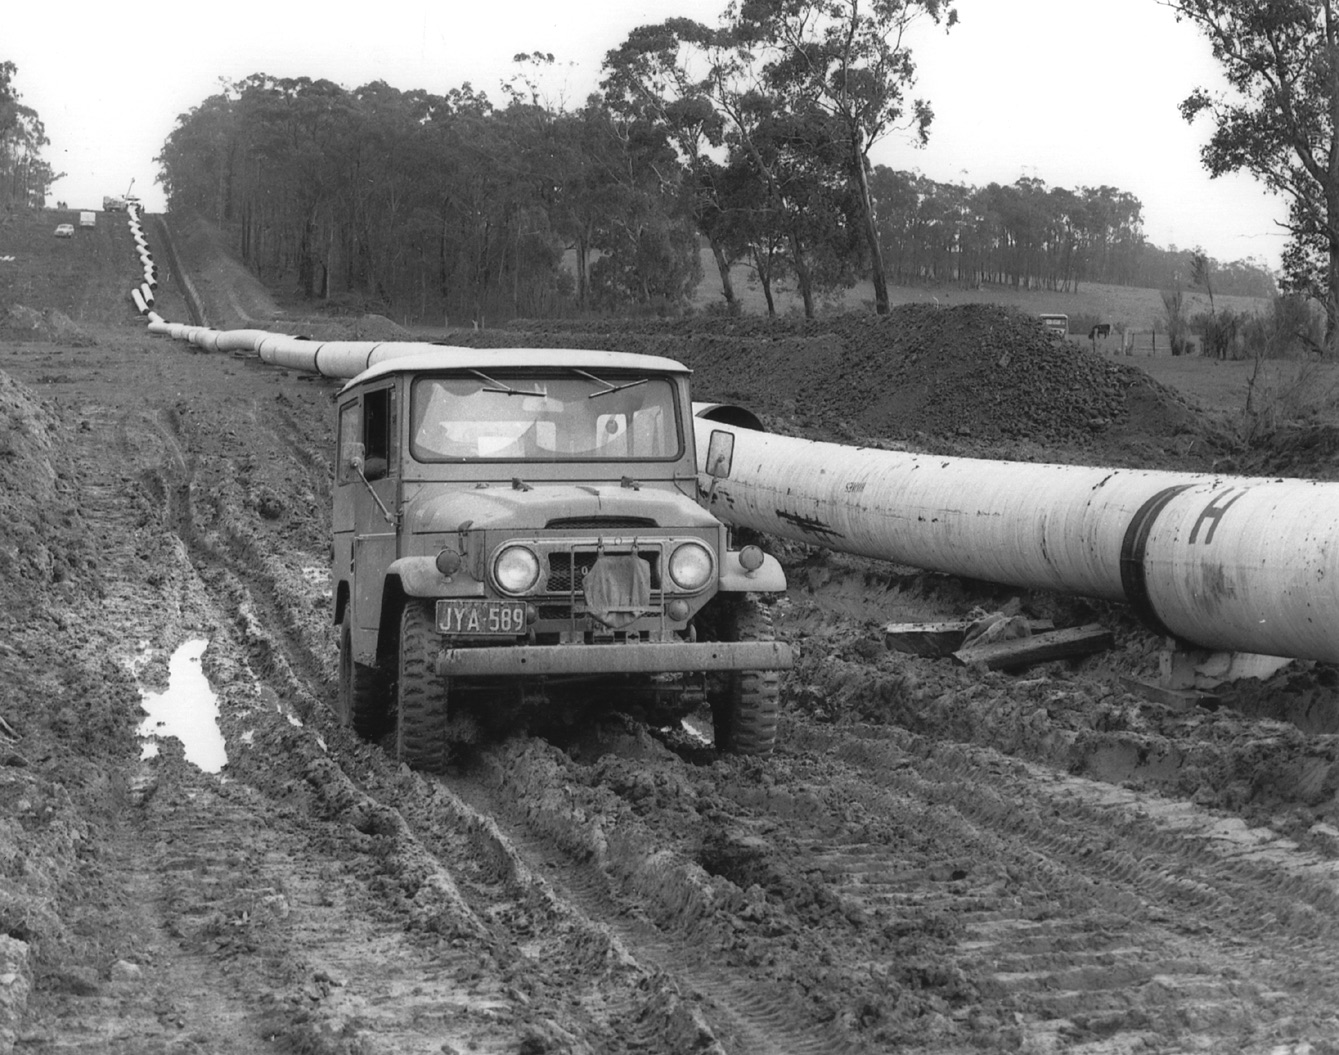 The story of the Toyota LandCruiser, the car that built Australia's engineering wonder